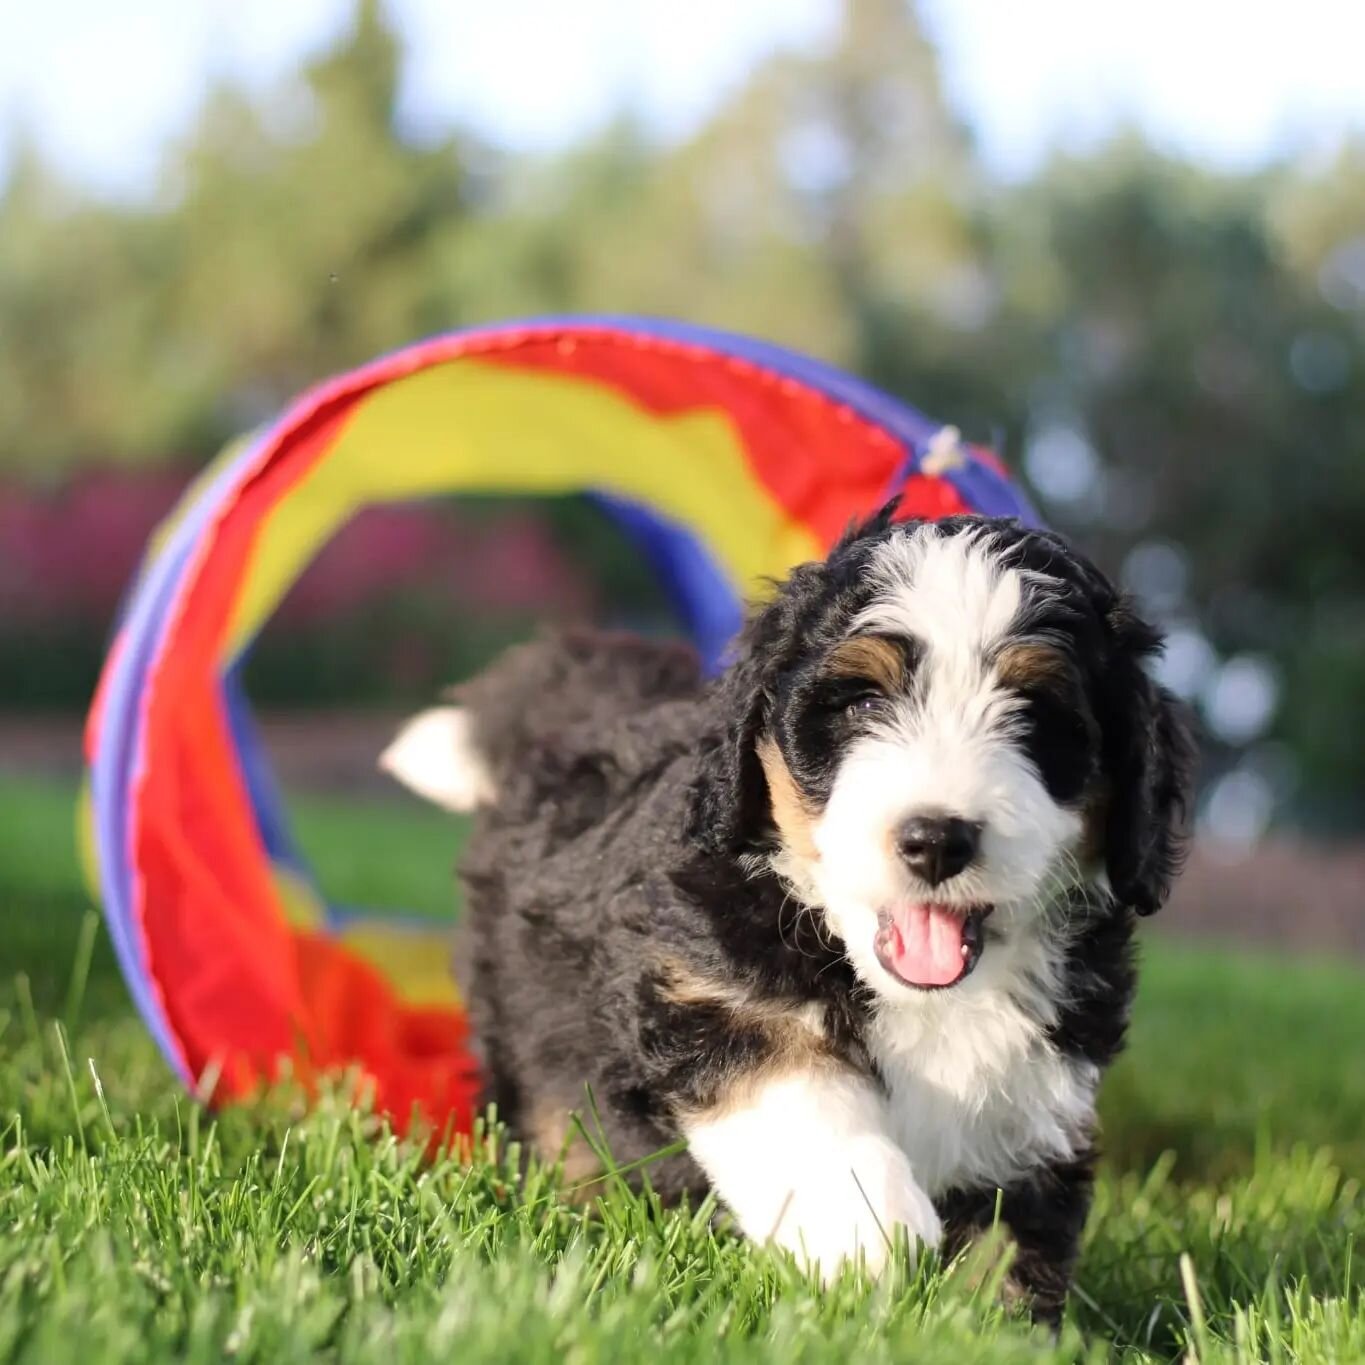 Looks like this little Cowboy has a future in agility ⛹️&zwj;♂️

#haystackmountain #haystackbernedoodles  #bernedoodle #coloradobernedoodle #bernedoodlesofinstagram  #doodlesofinstagram #doodlesoftheworld #dogsofinstagram #puppiesofinstagram #puppy #